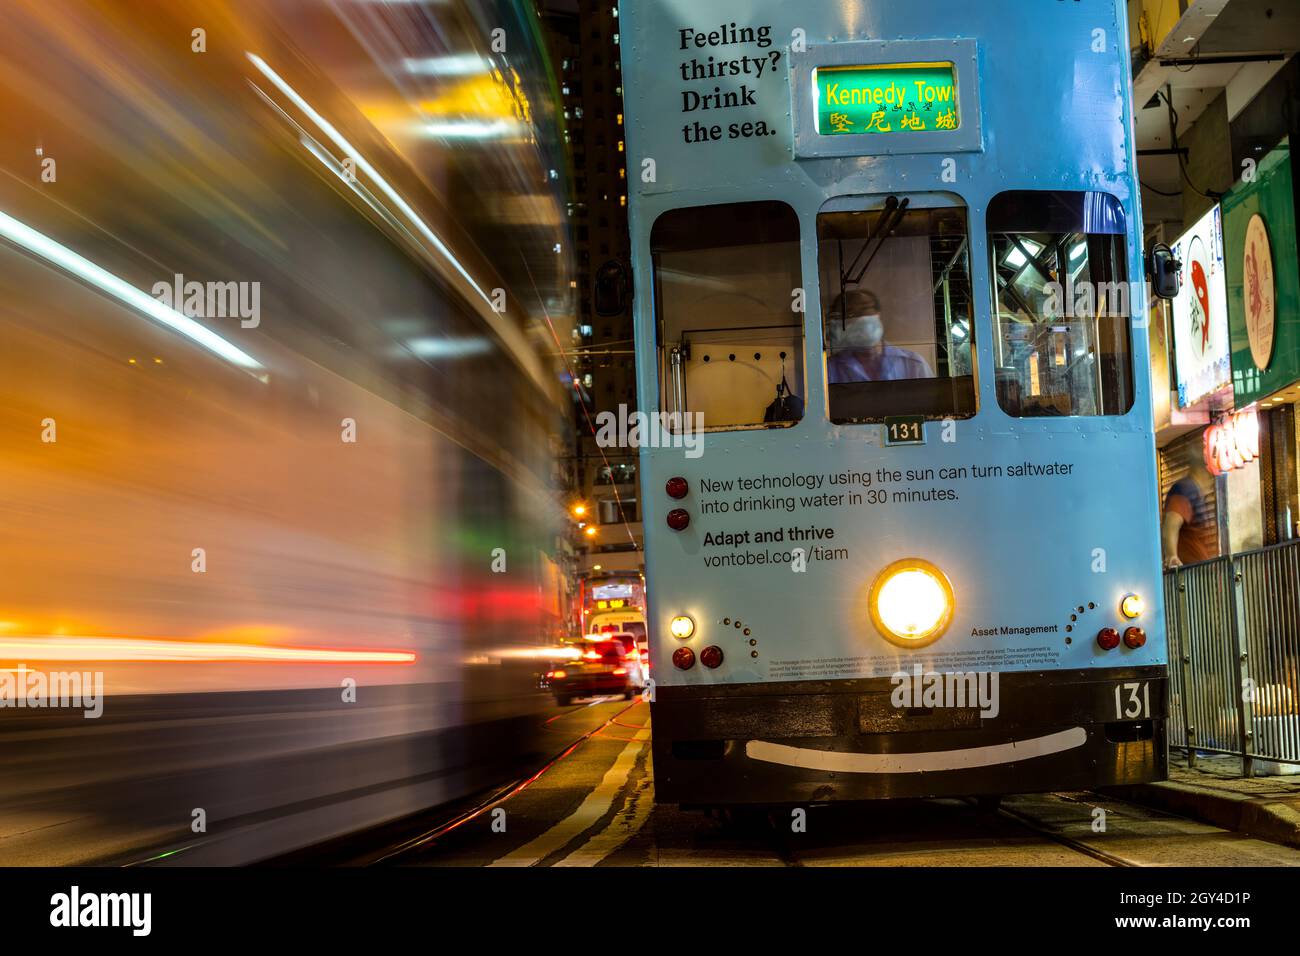 A Hong Kong tram advertising the development of a new light responsive technology that can convert seawater into drinking water within 30 minutes. Stock Photo